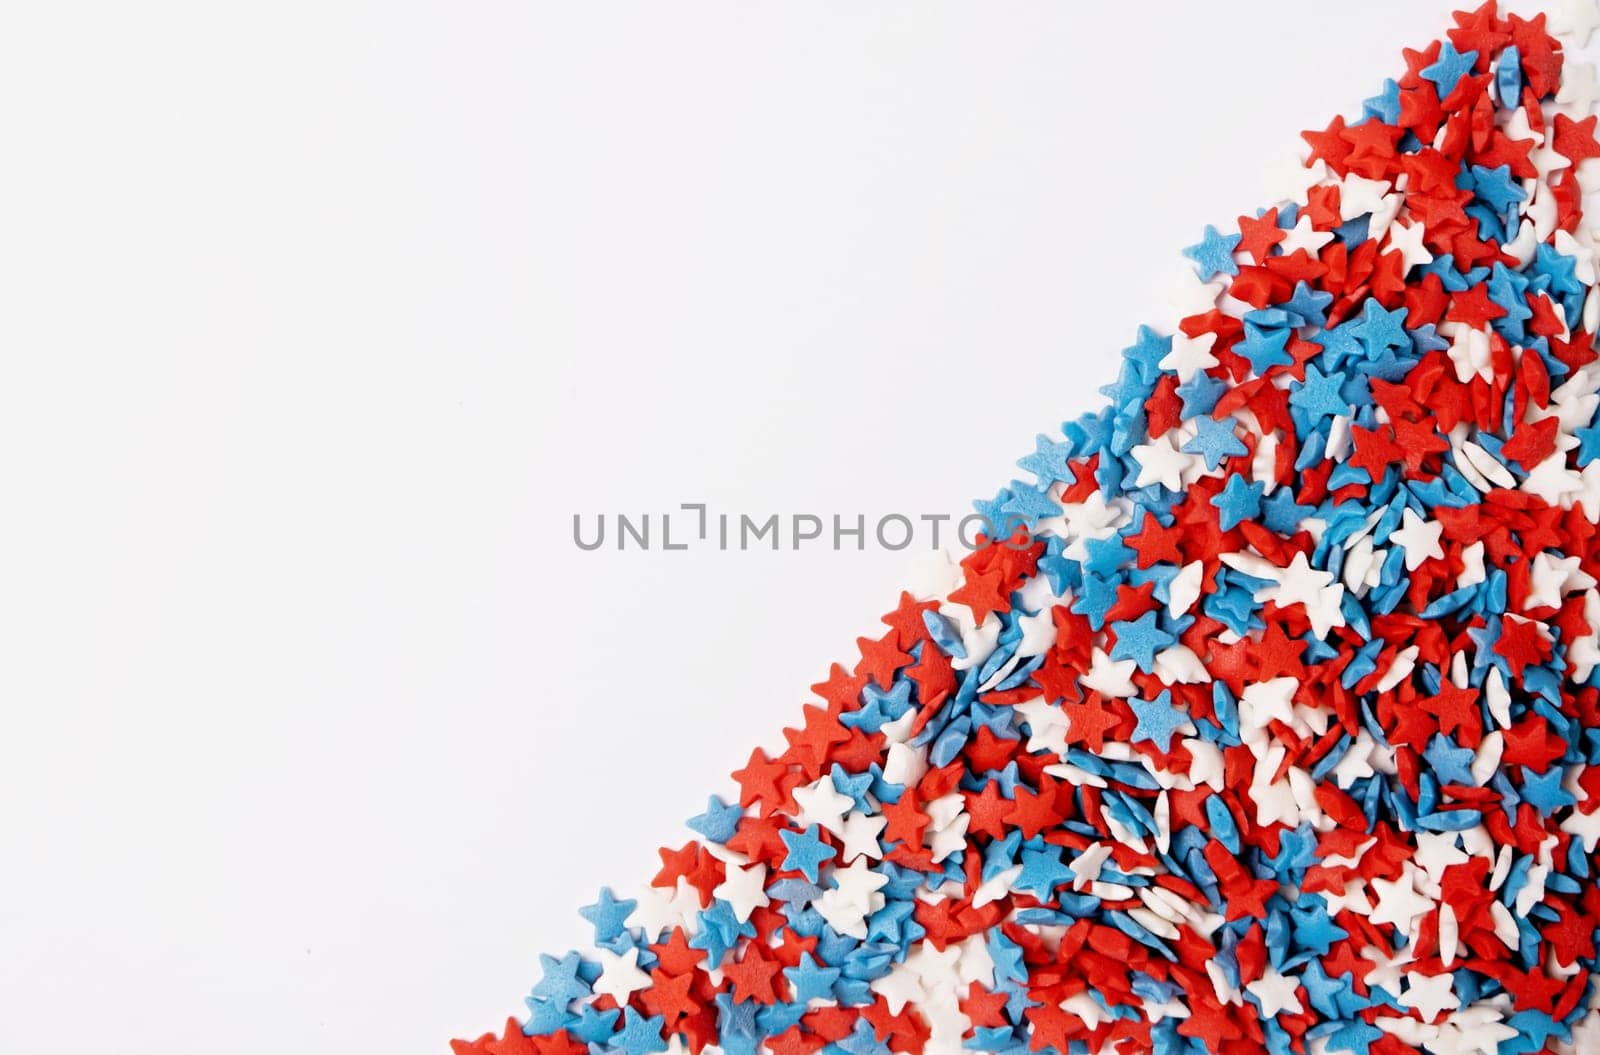 4th of July American Independence Day sprinkles decorations frame on white background, mockup